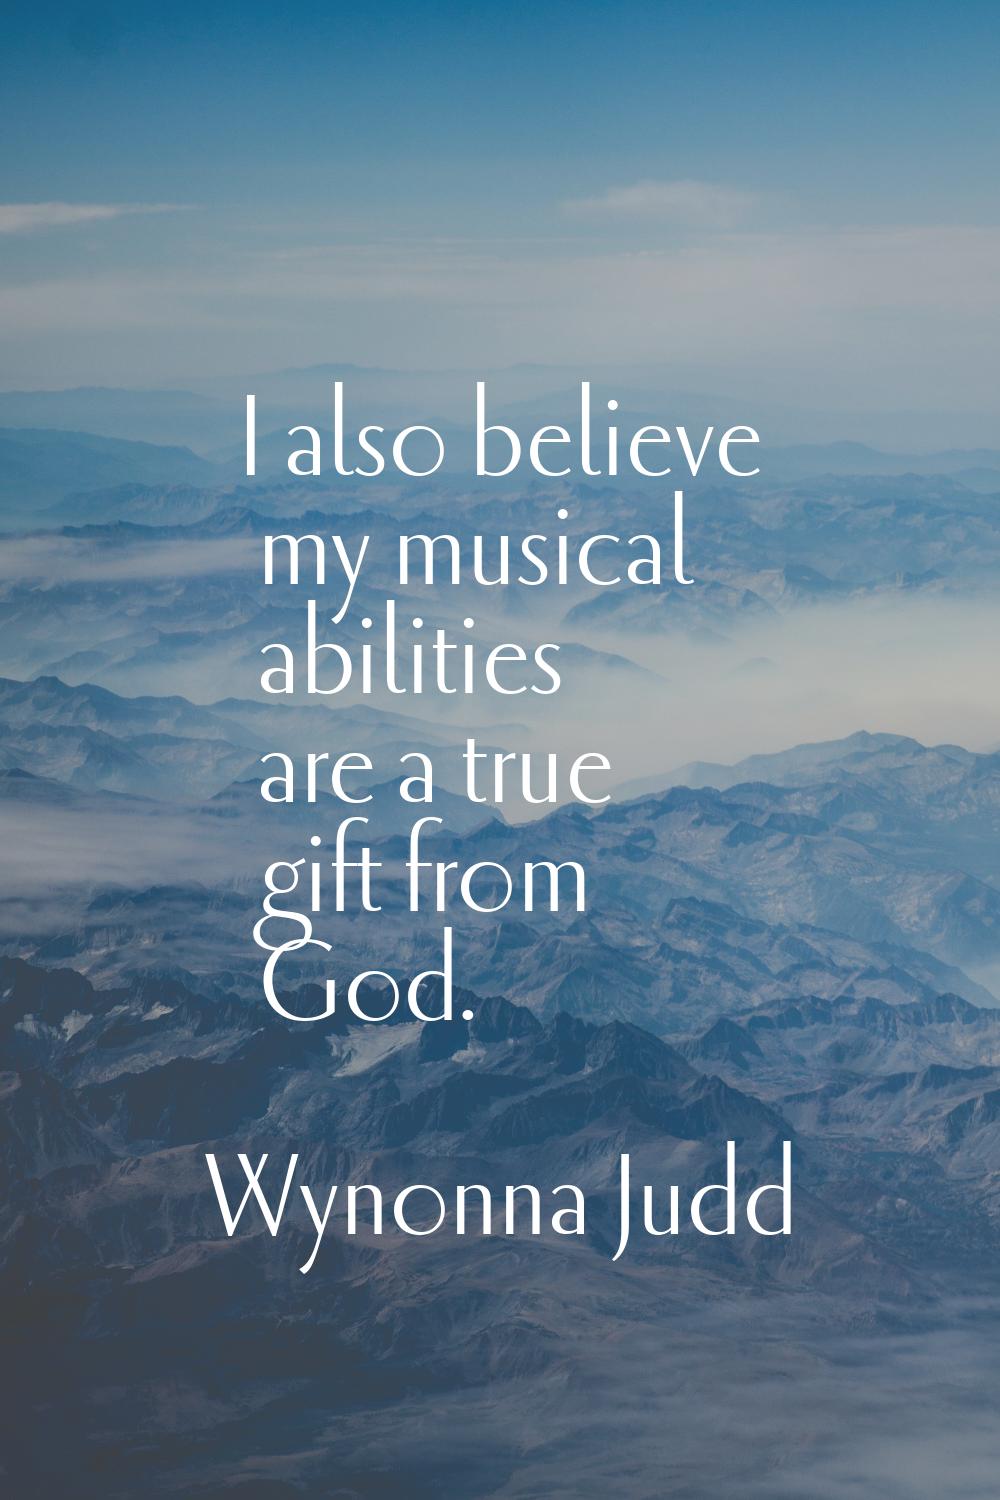 I also believe my musical abilities are a true gift from God.